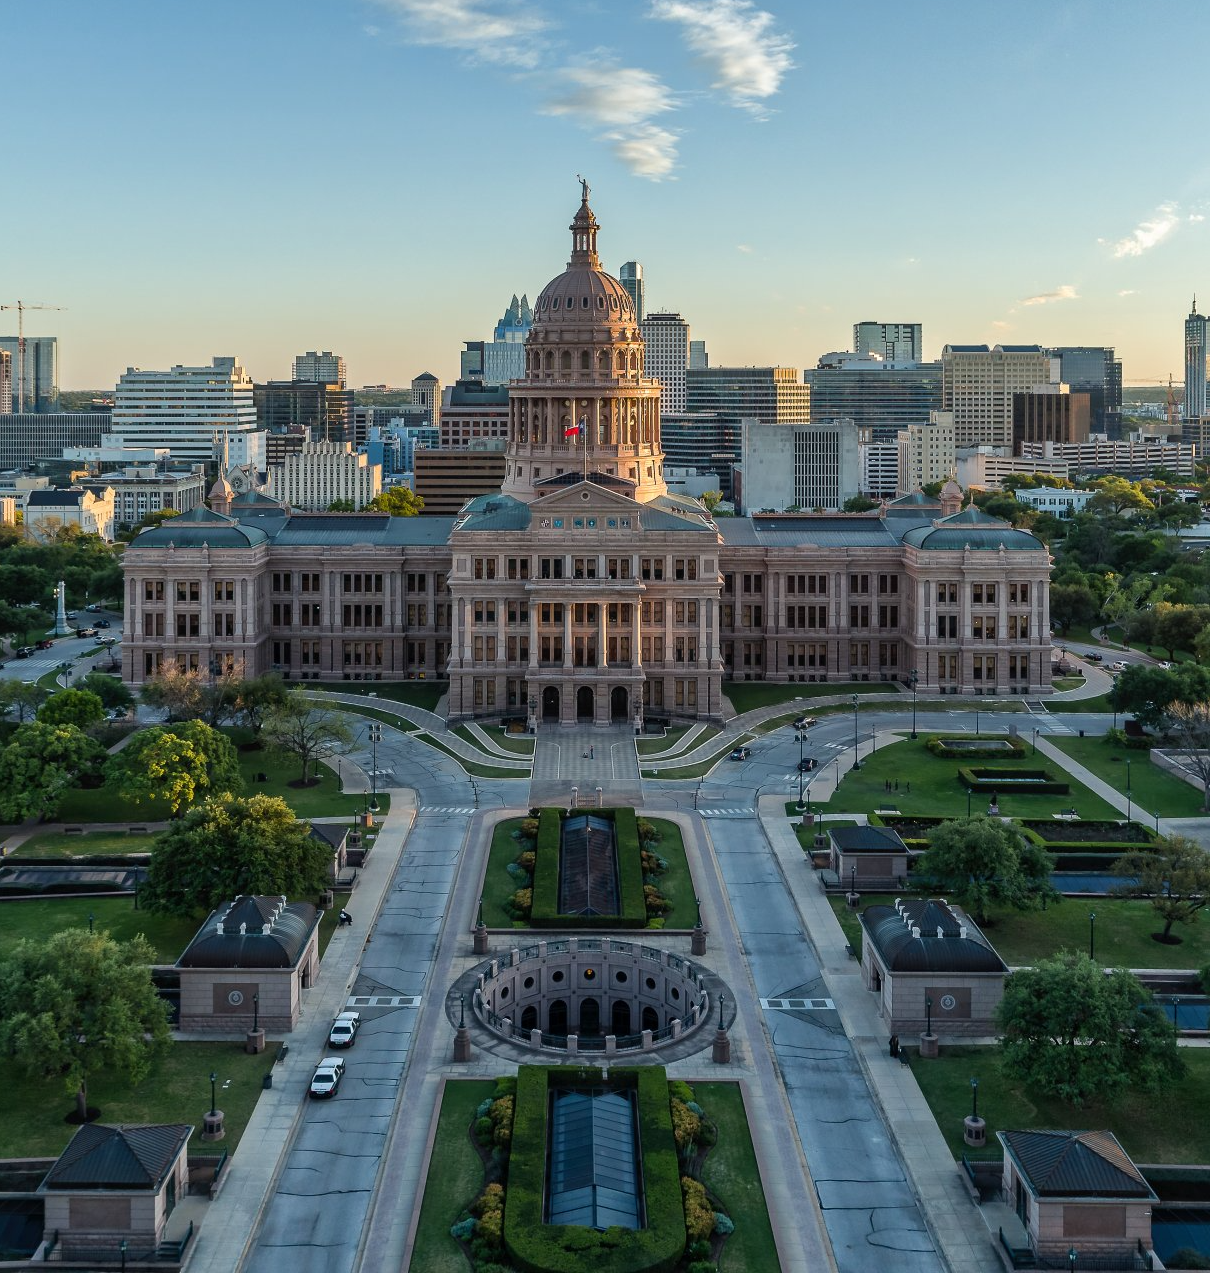 An aerial view of the texas state capitol building